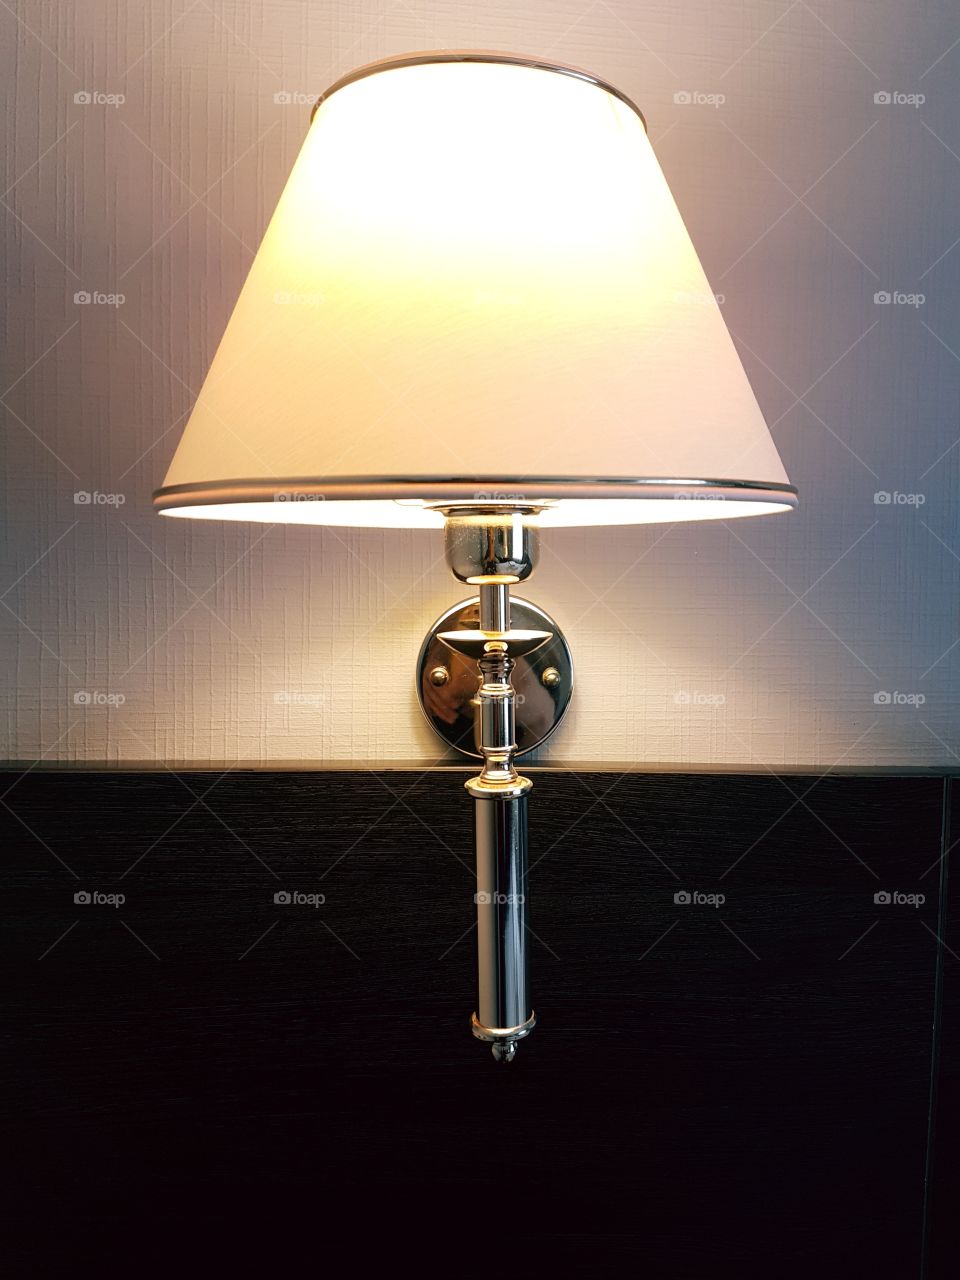 Modern design element of wall lamp. Light and shadow